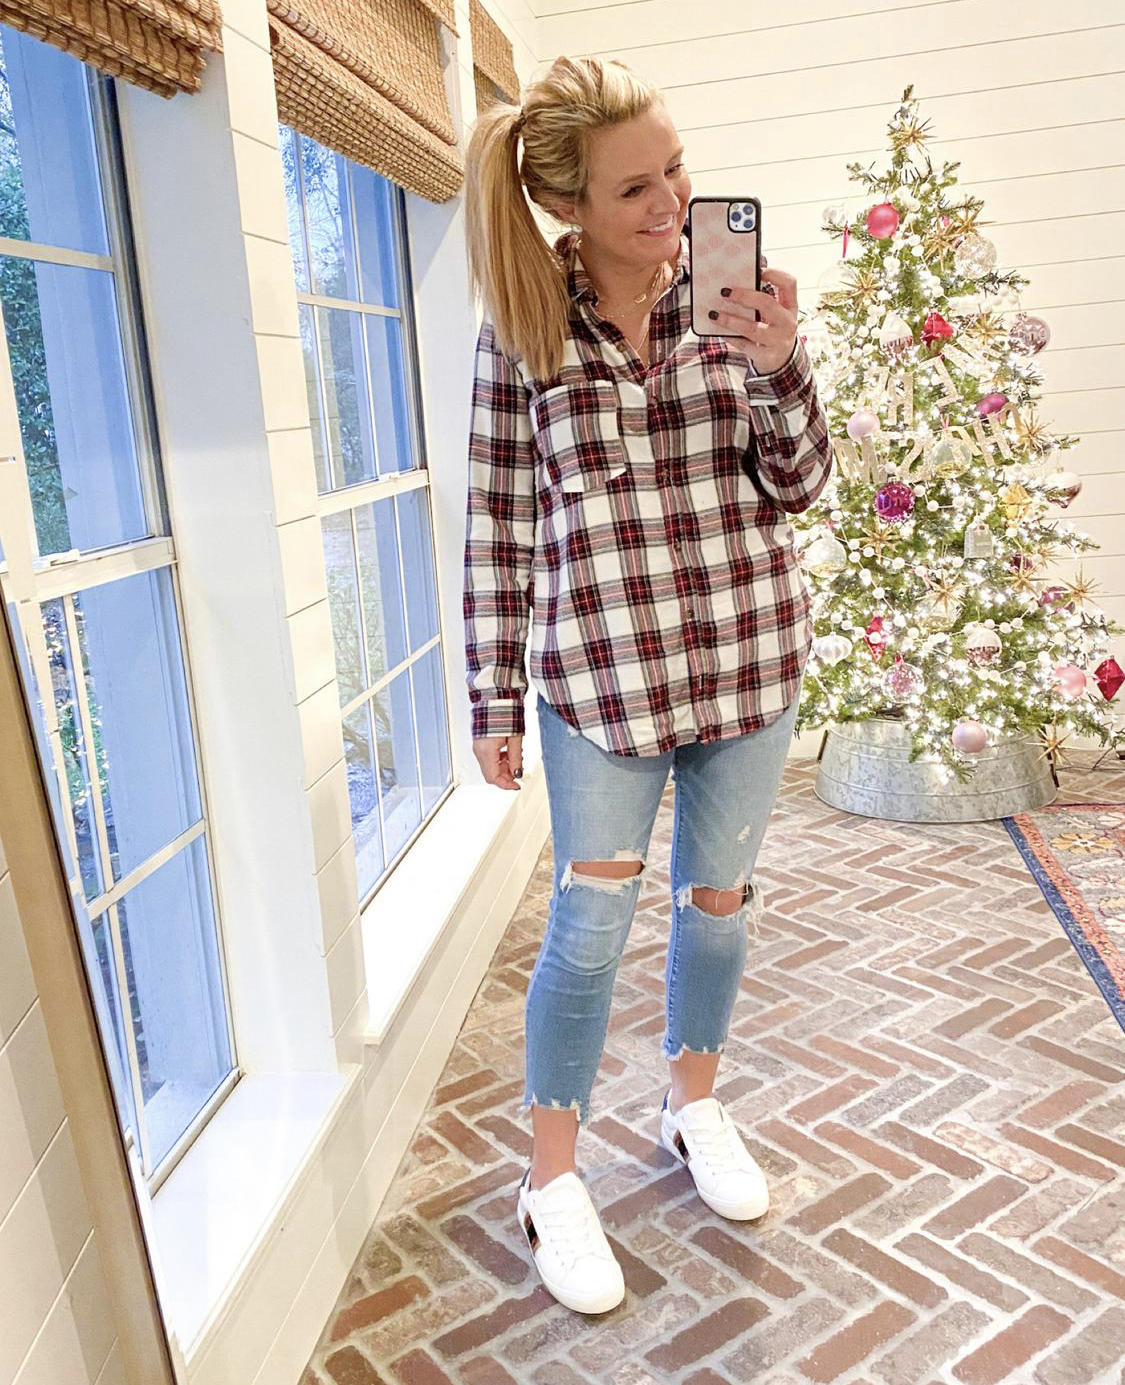 December Outfits by popular Houston fashion blog, Fancy Ashley: image of a woman standing in front of a Christmas tree decorated with pink, white and silver ornaments and wearing a red and white plaid button up shirt, distressed denim, and white sneakers. 